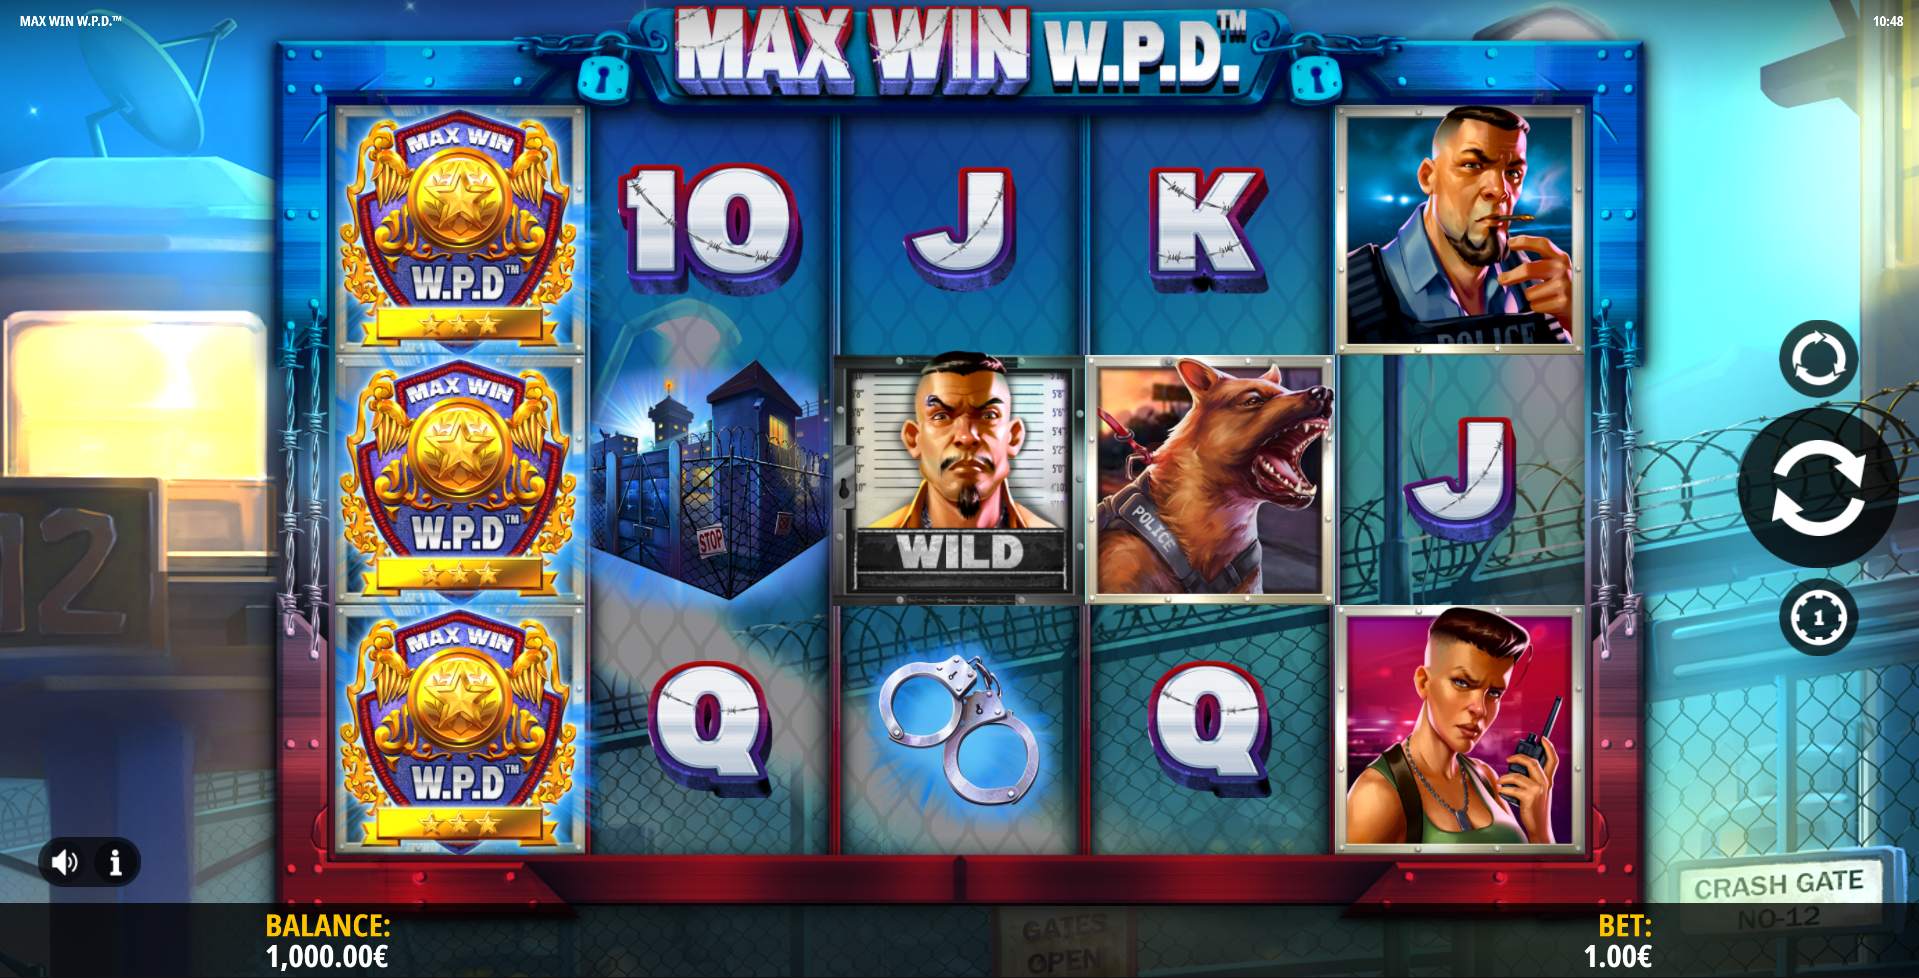 Max Win W.P.D Base Game